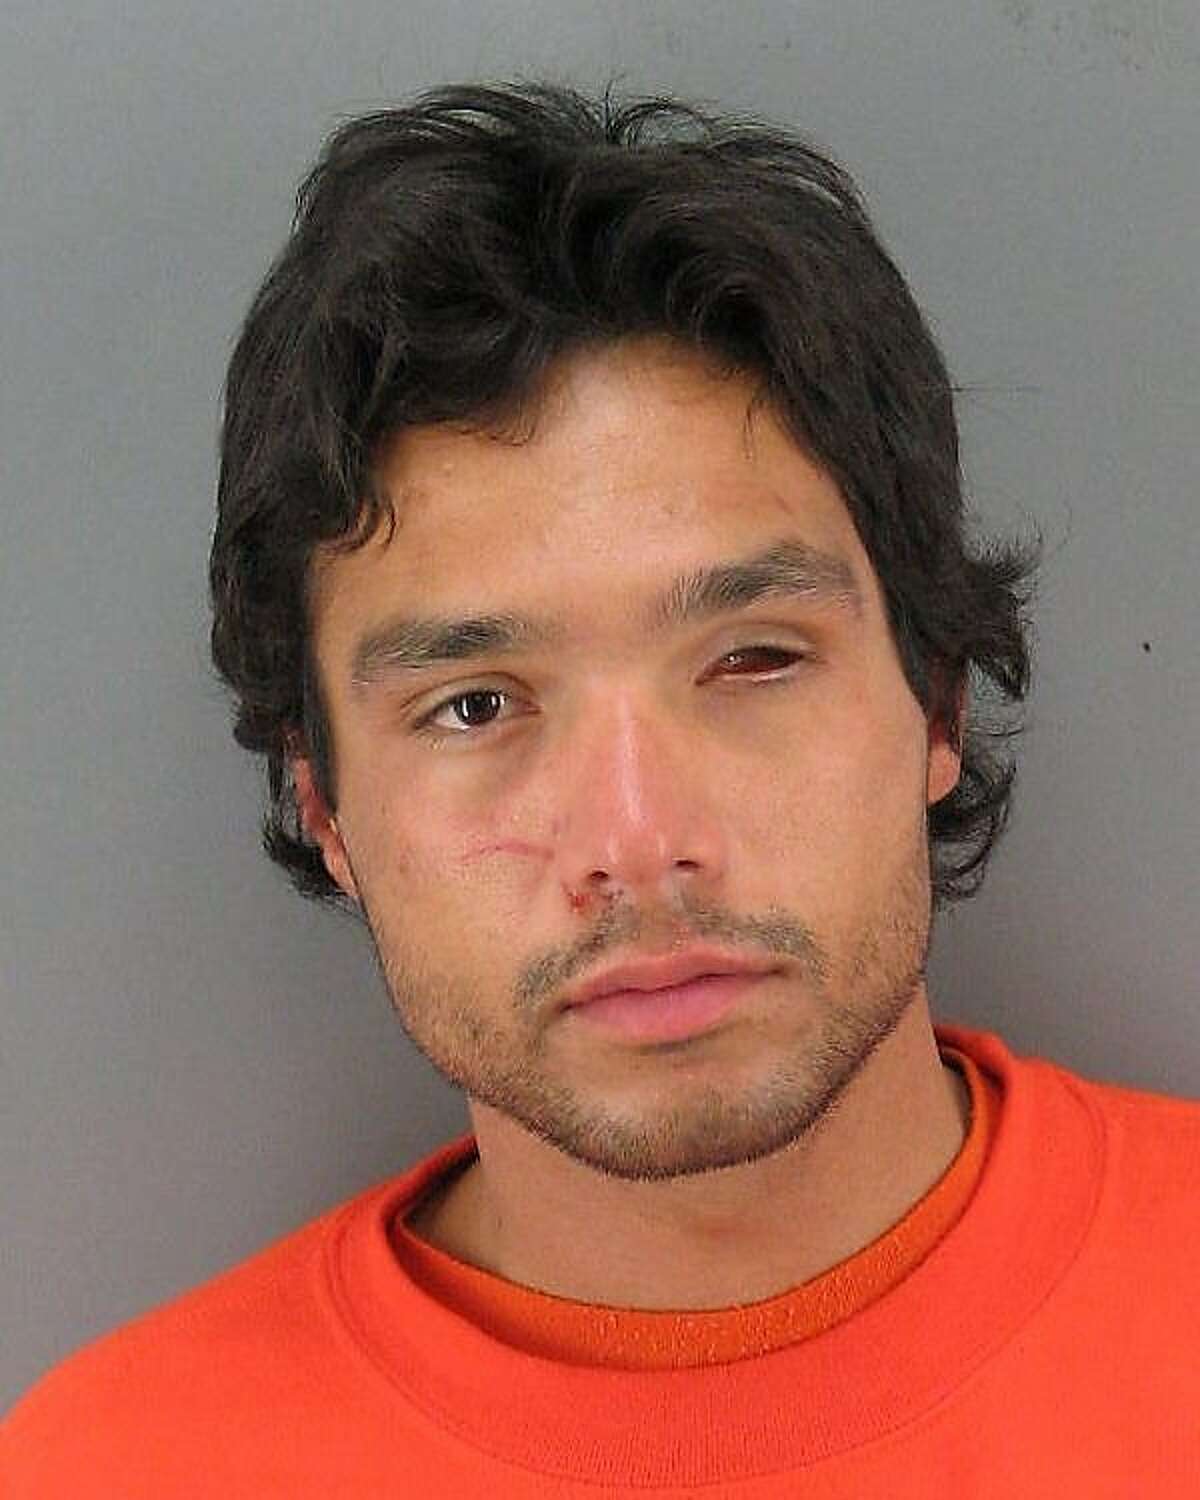 S.F. naked felon in and out of psych ward